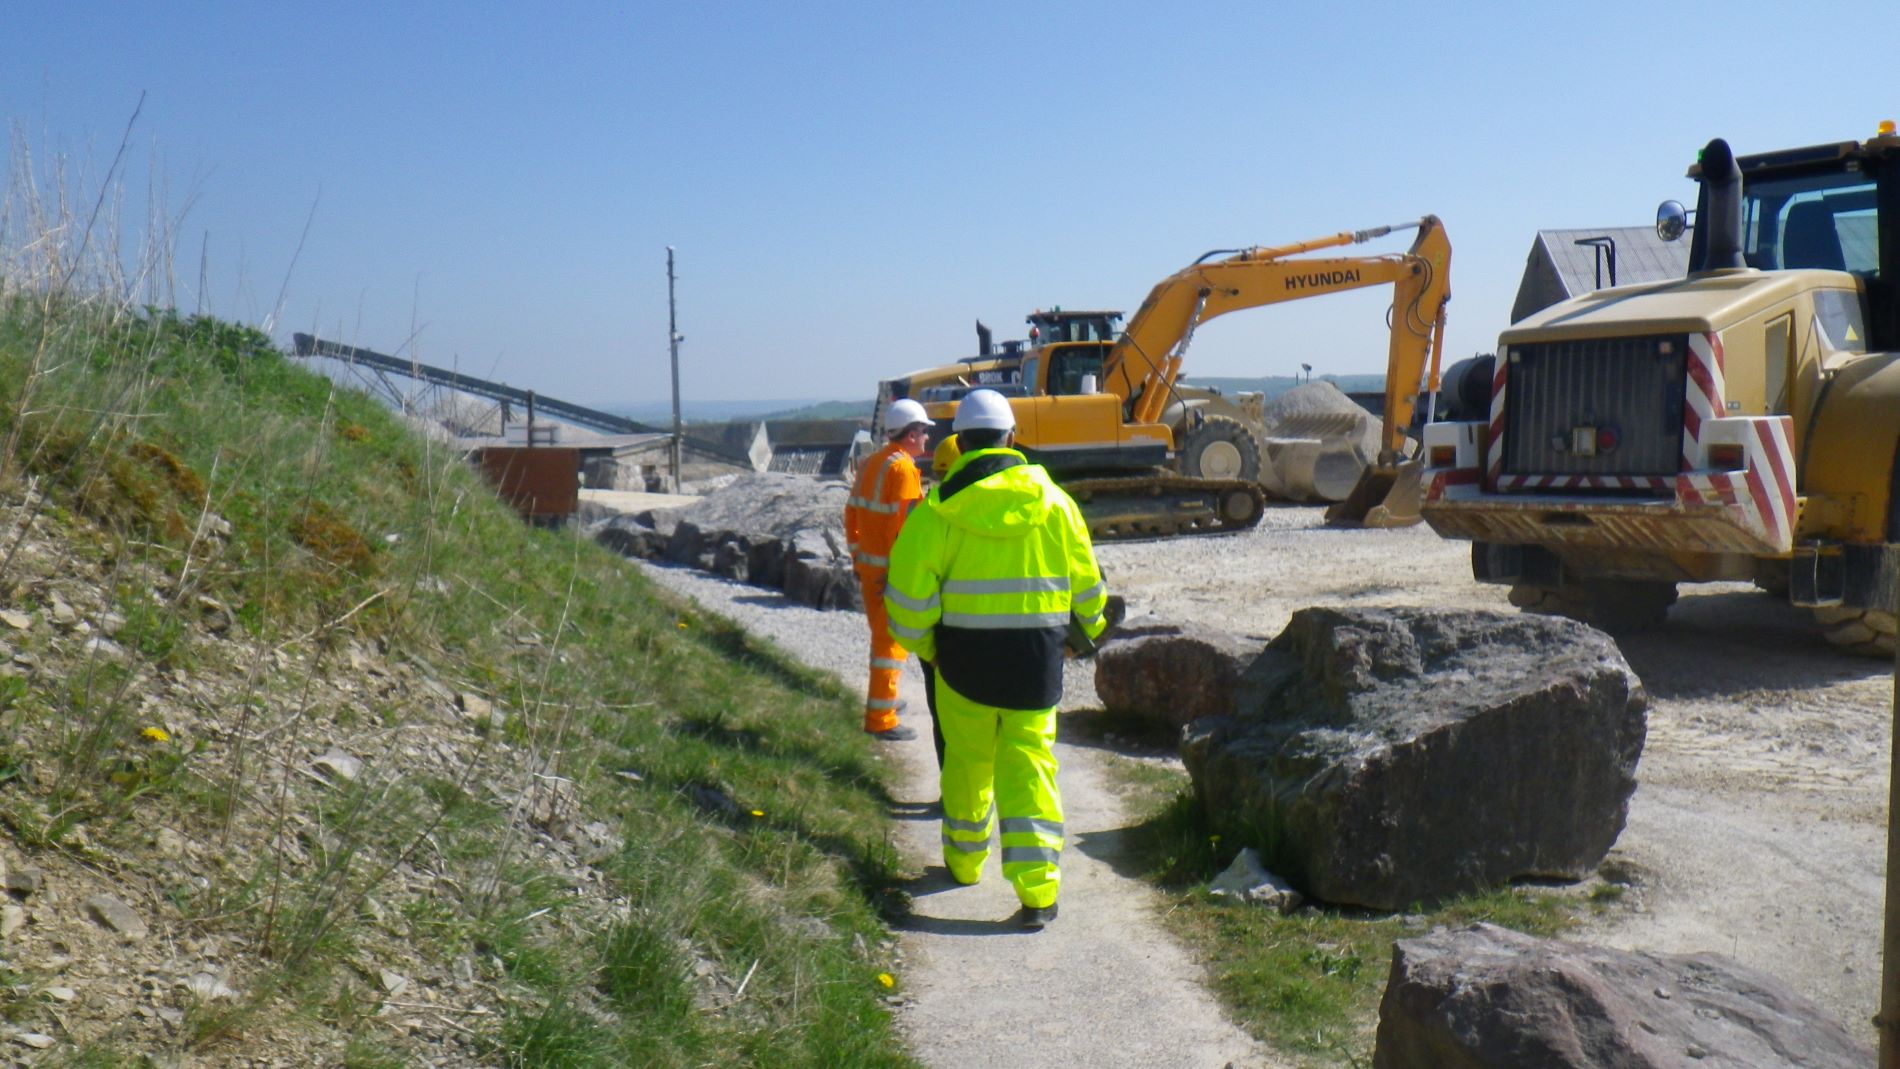 A group of people wearing high vis outfits stood next to large excavators, on the site of a quarry.